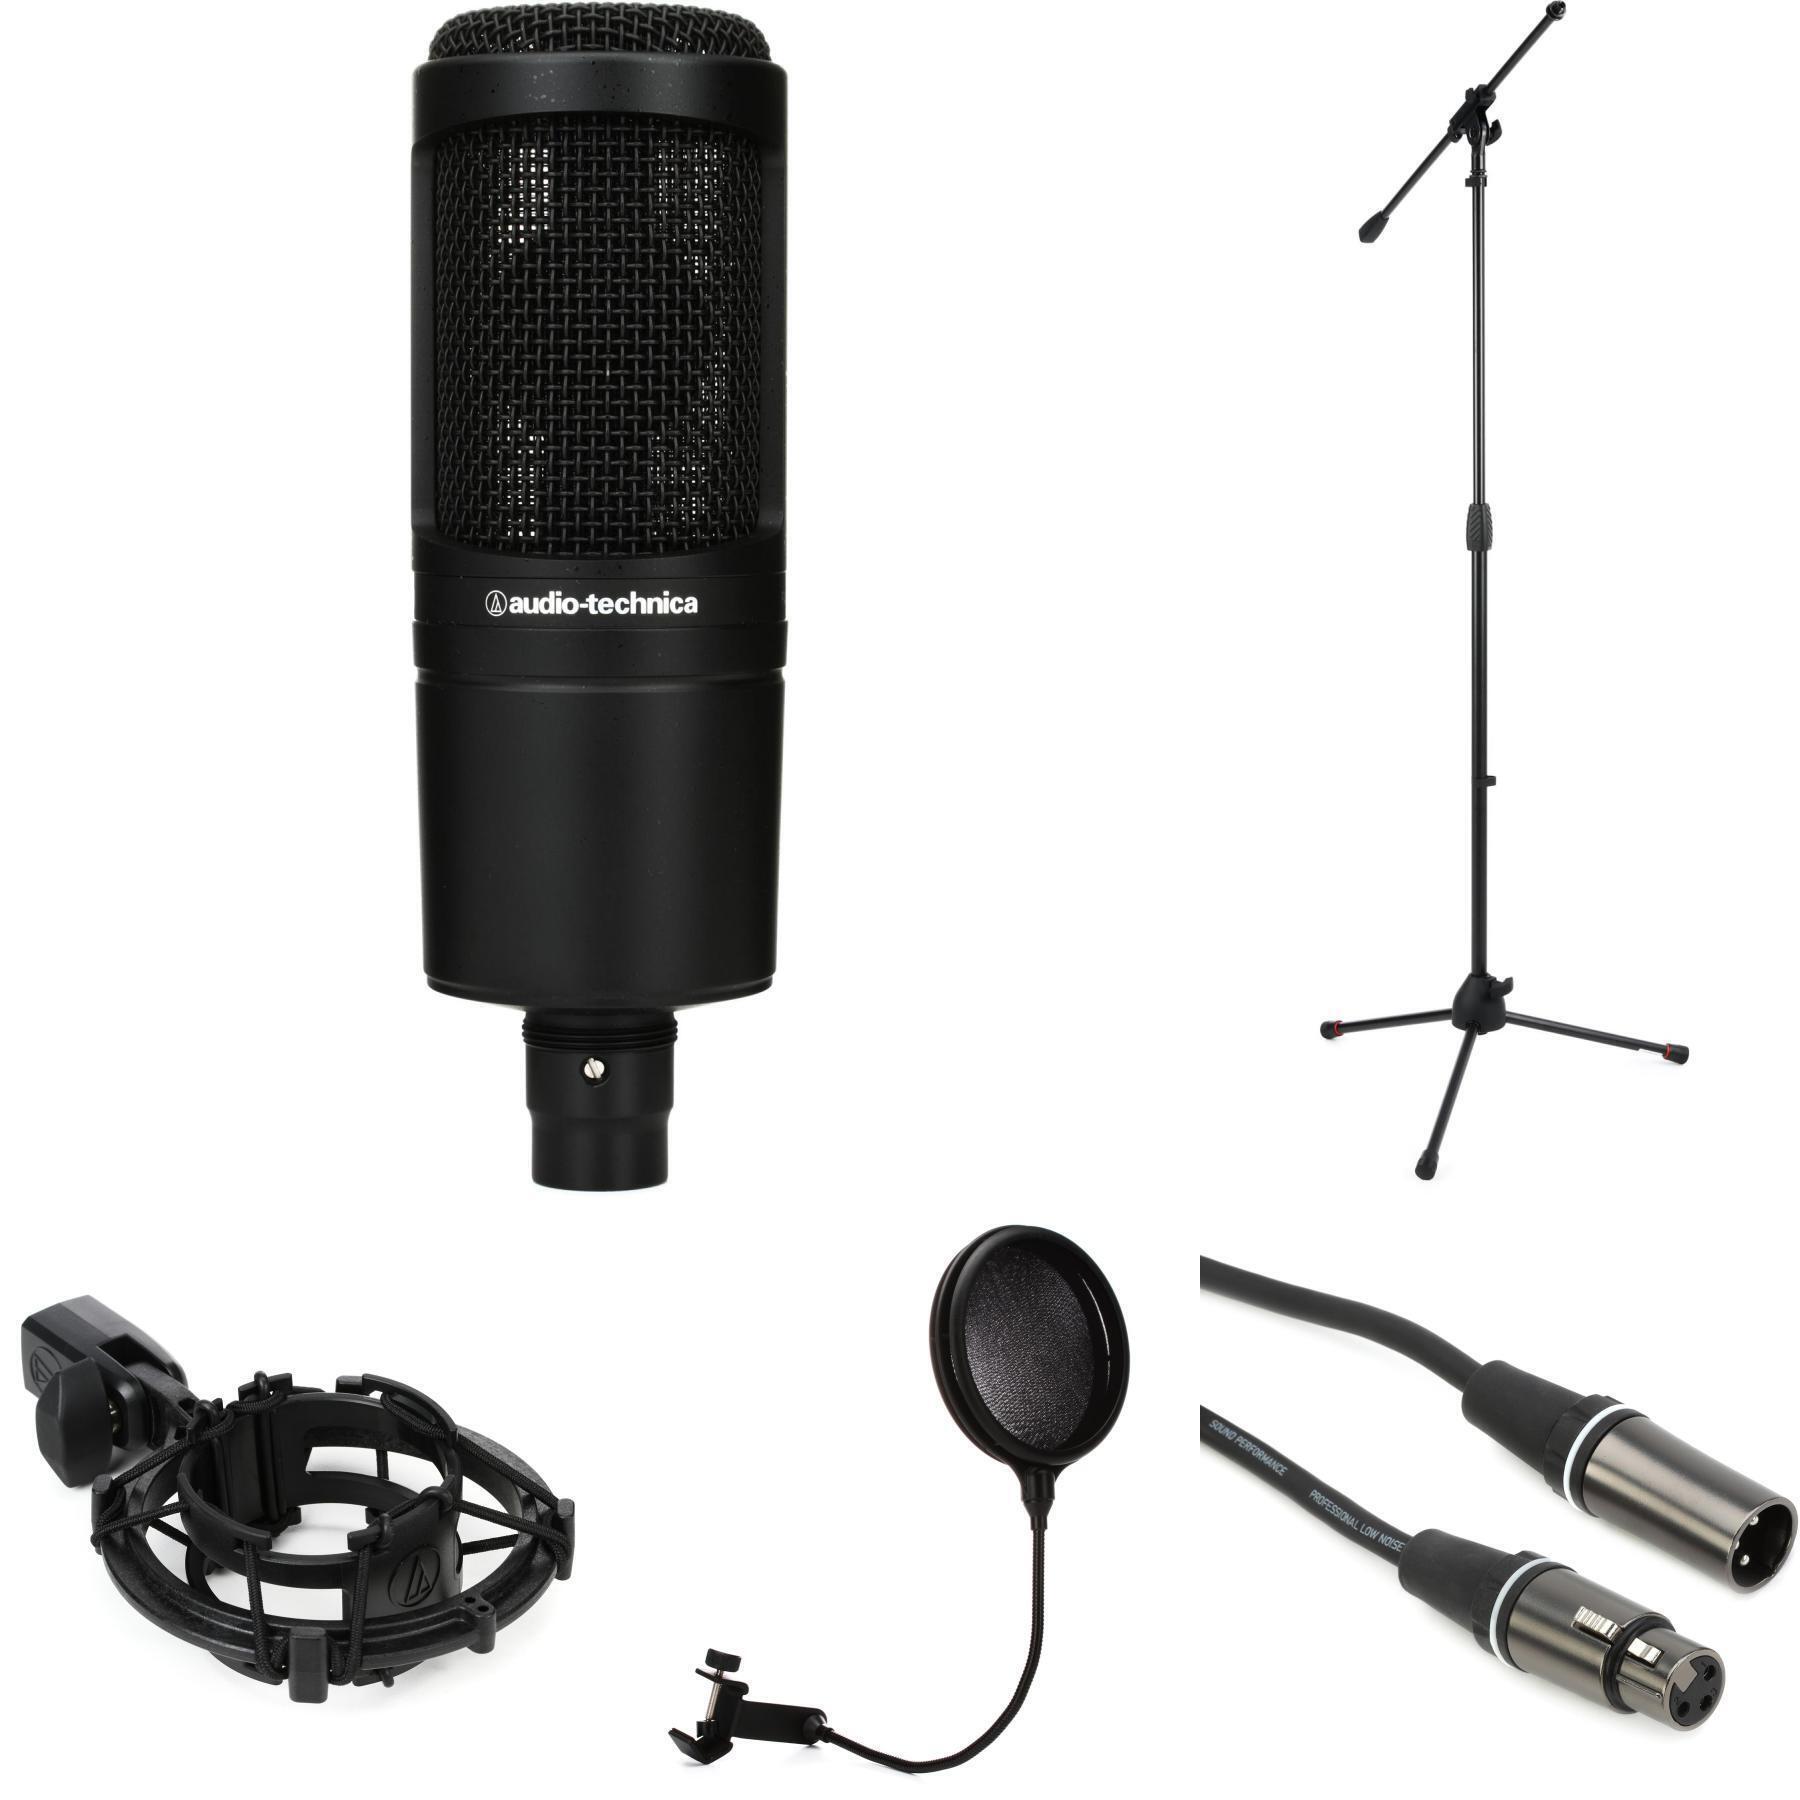 Audio-Technica AT2020 Microphone Bundle with Shockmount, Stand, and Cable